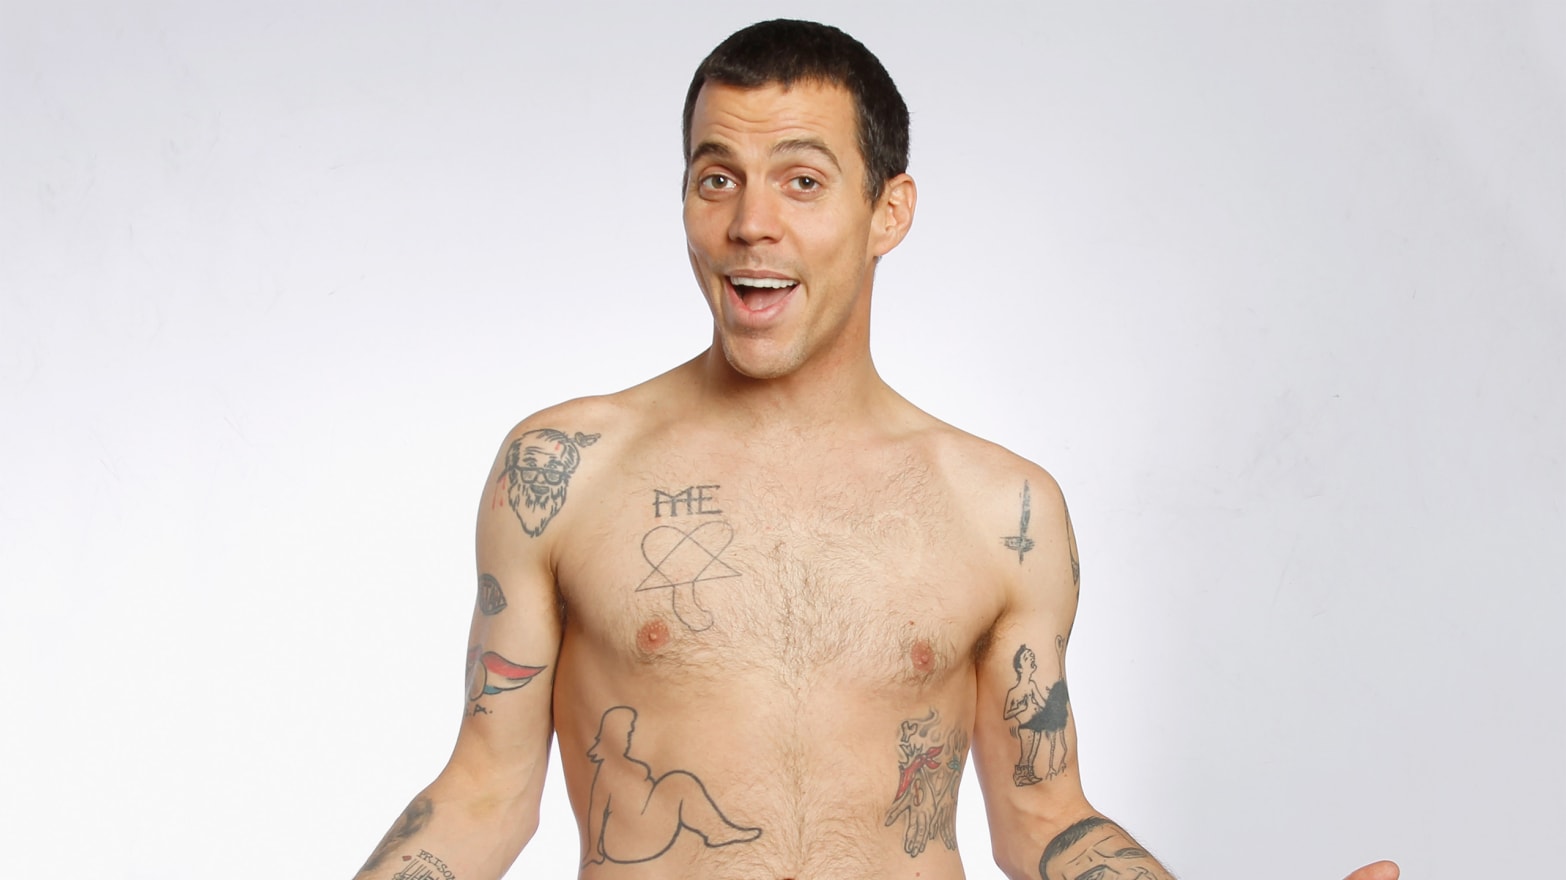 Steve-O's Tattoo of His Baby Daughter - wide 4